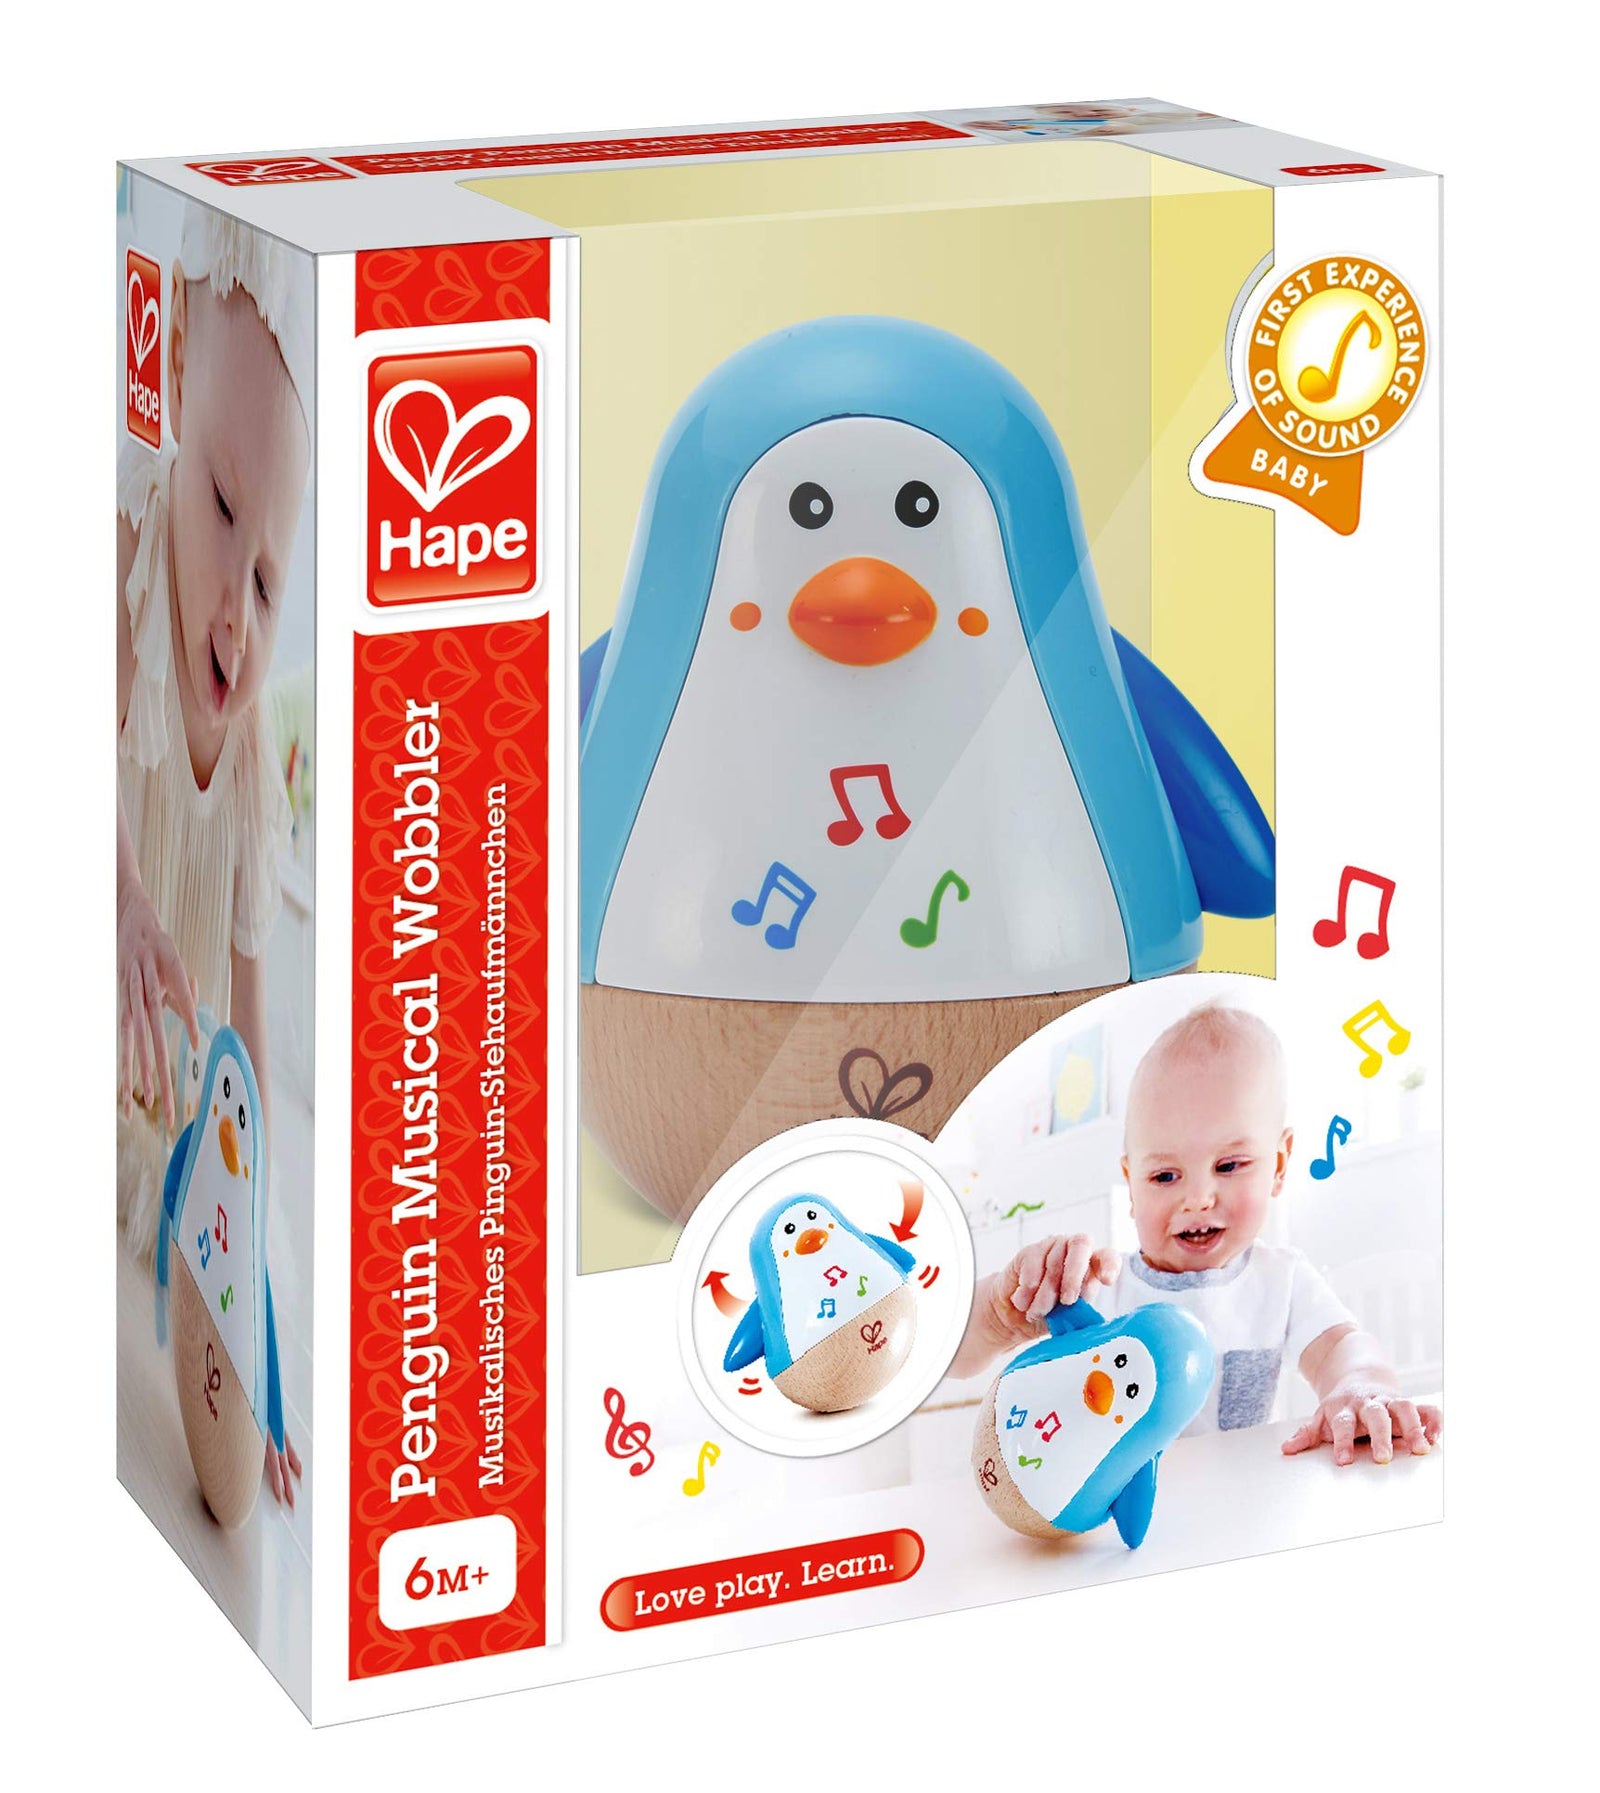 Hape Penguin Musical Wobbler | Colorful Wobbling Melody Penguin, Roly Poly Toy for Kids 6 Months+, Multicolor, 5'' x 2'' (E0331)